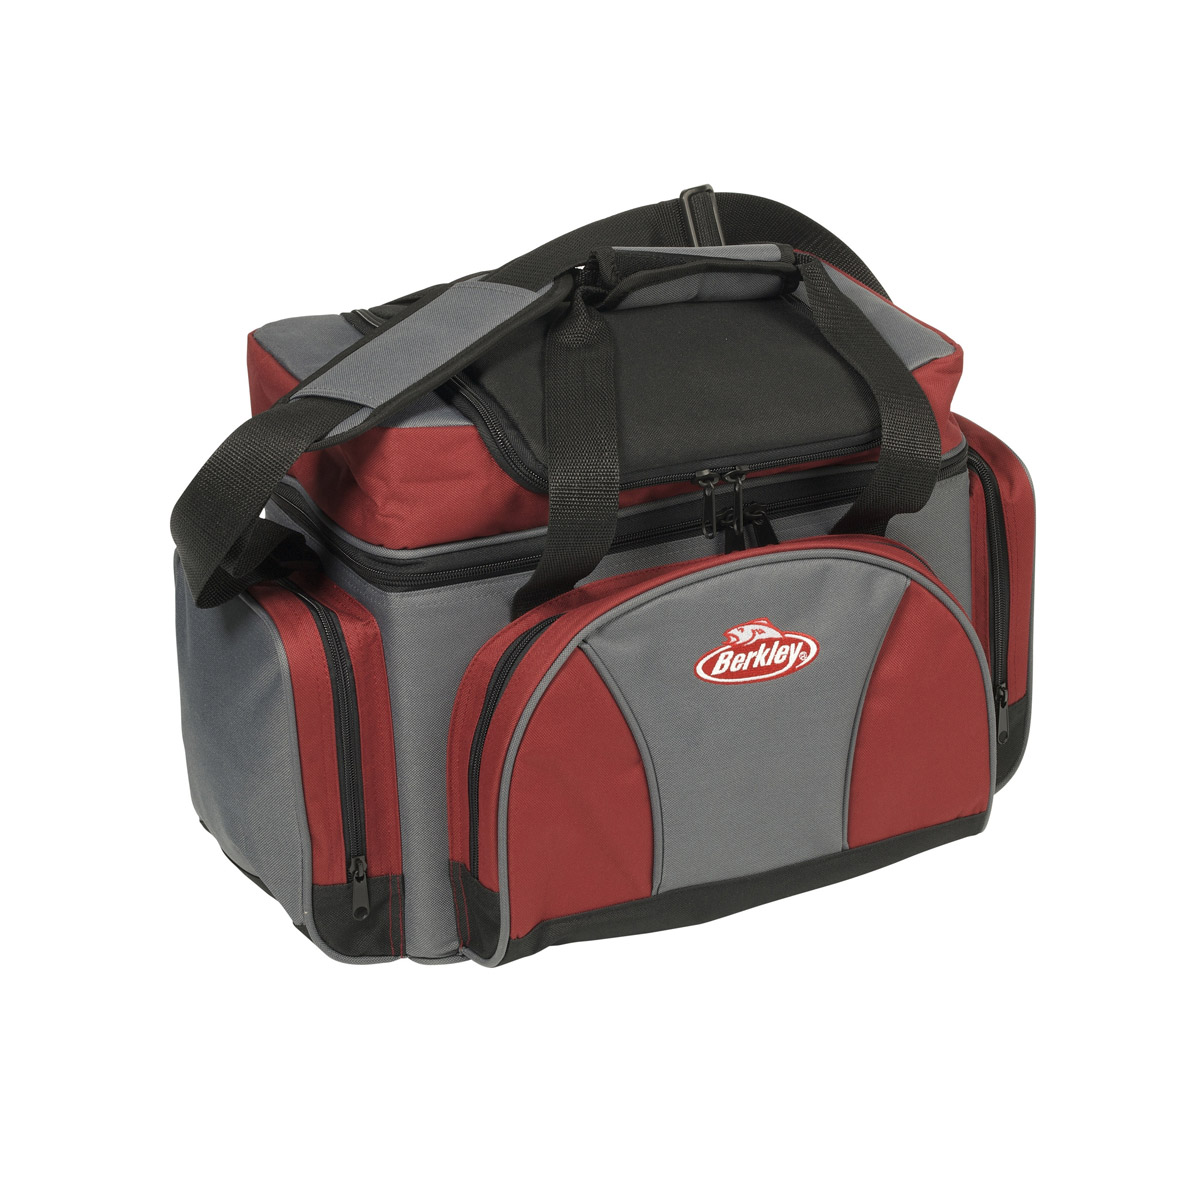 Berkley red storage bag with boxes